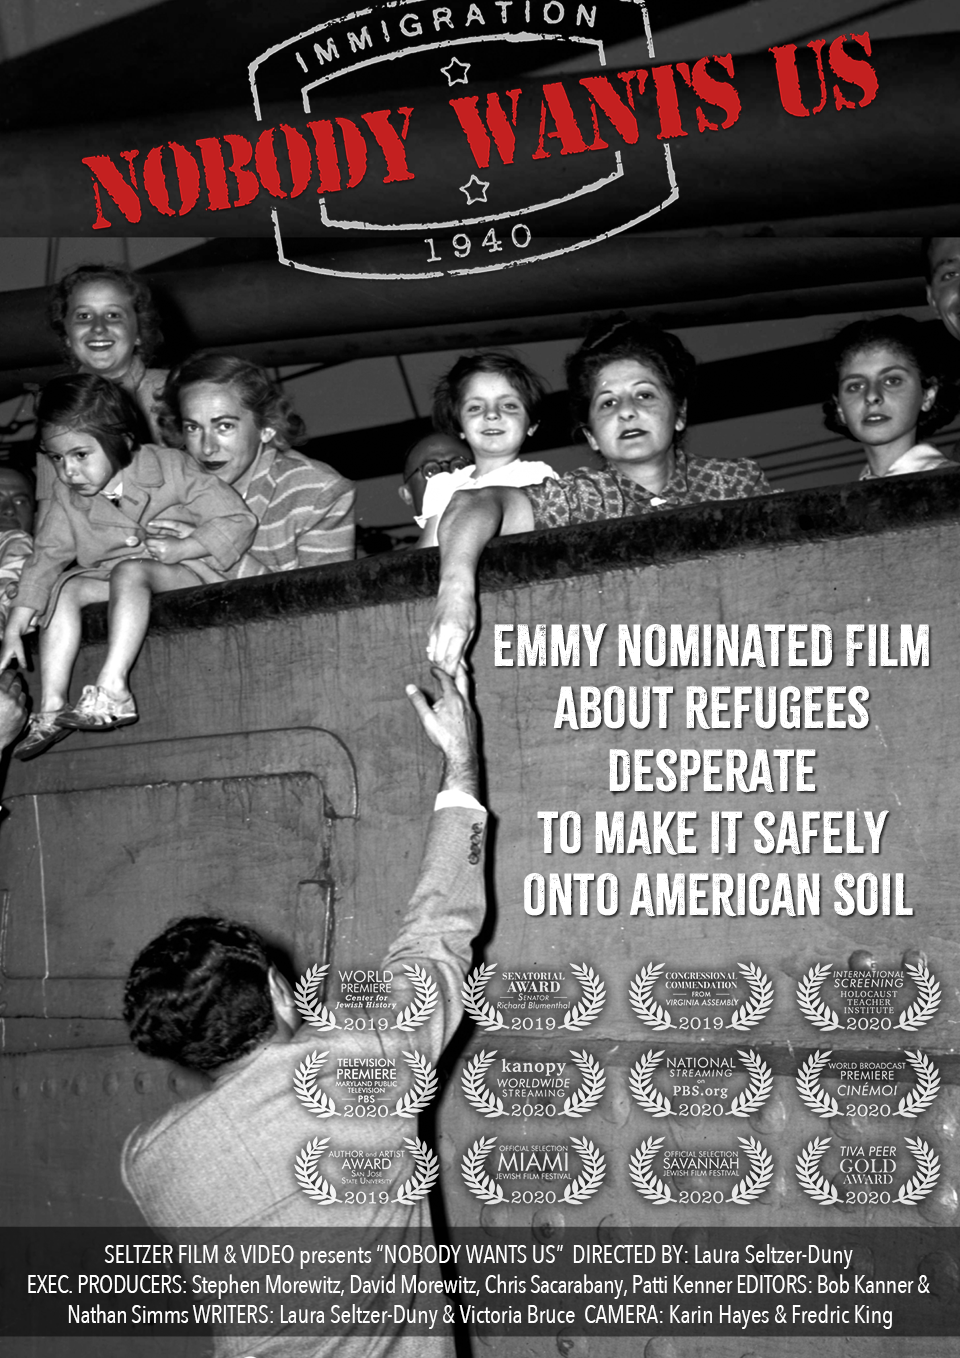 NOBODY WANTS US poster with Holocaust refugees on ship. Woman reaching down to her husband on land.